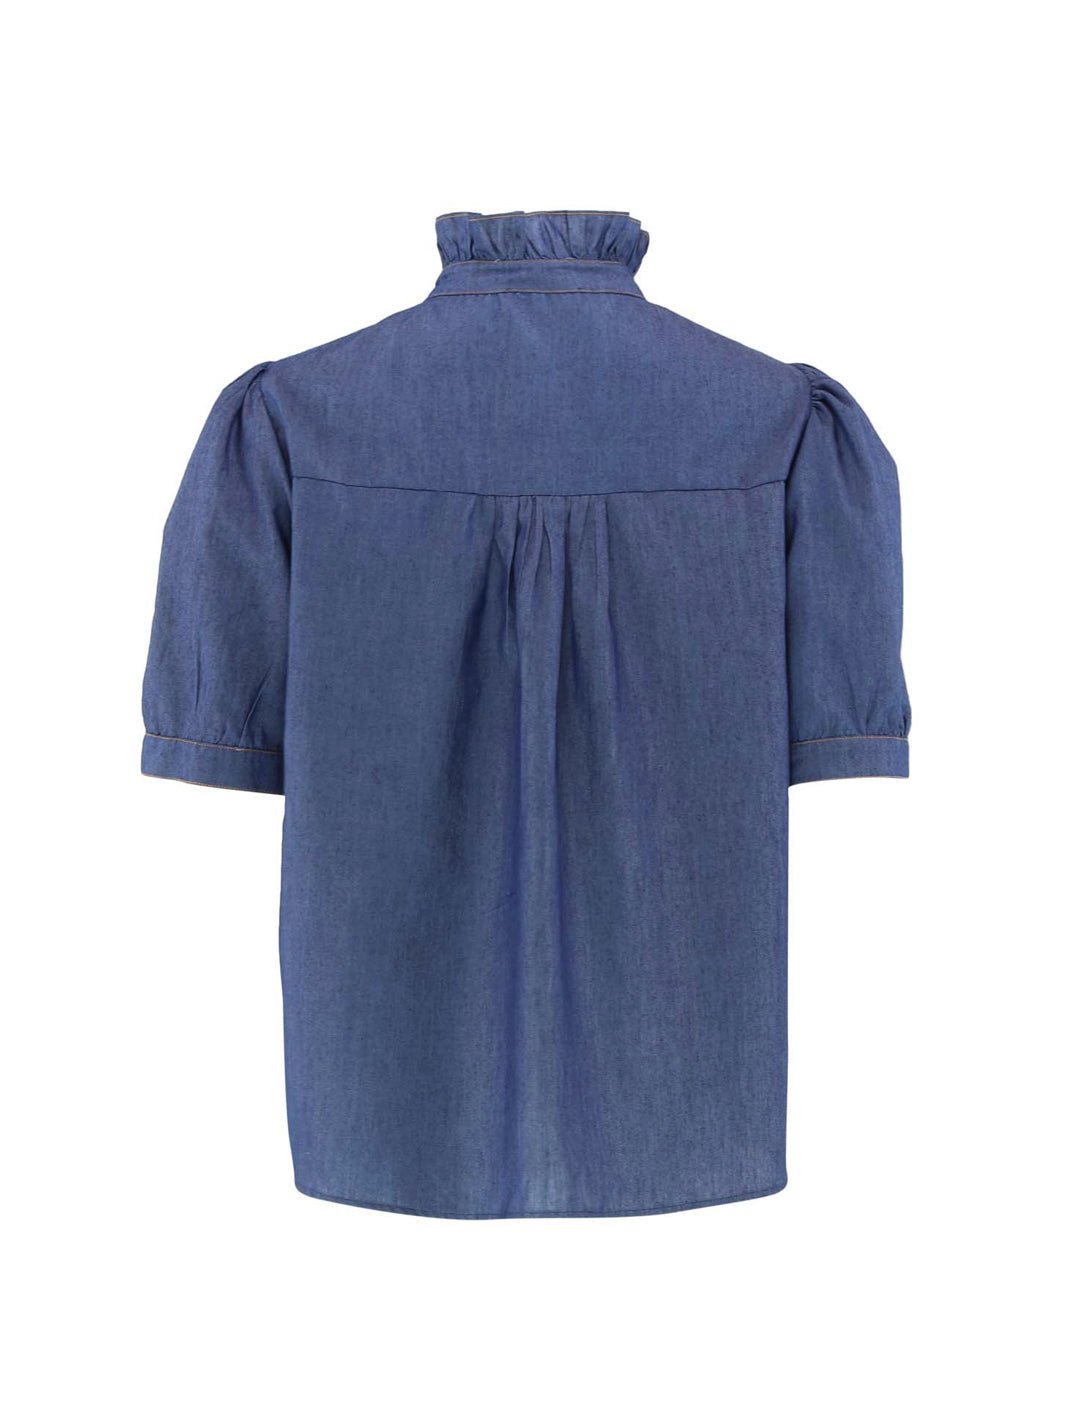 Continue Ariana SS chambre bluse dark blue - Online-Mode